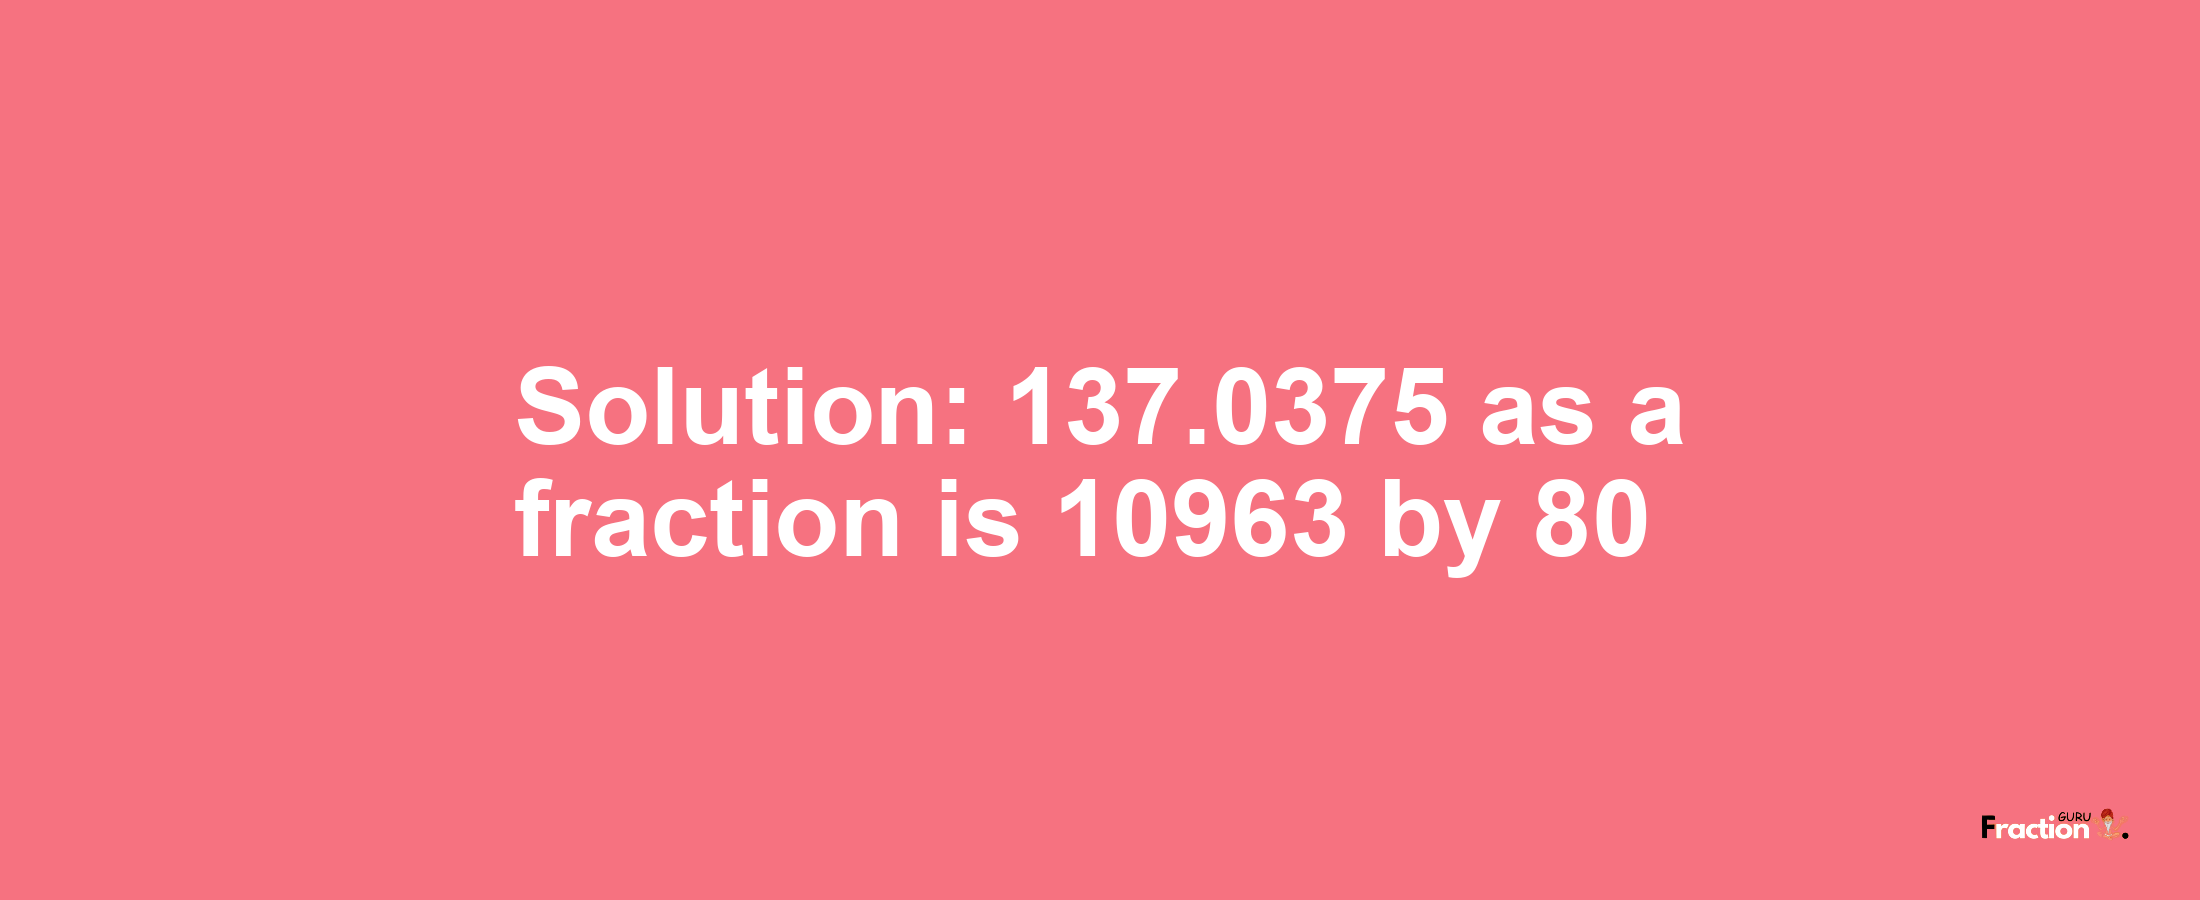 Solution:137.0375 as a fraction is 10963/80